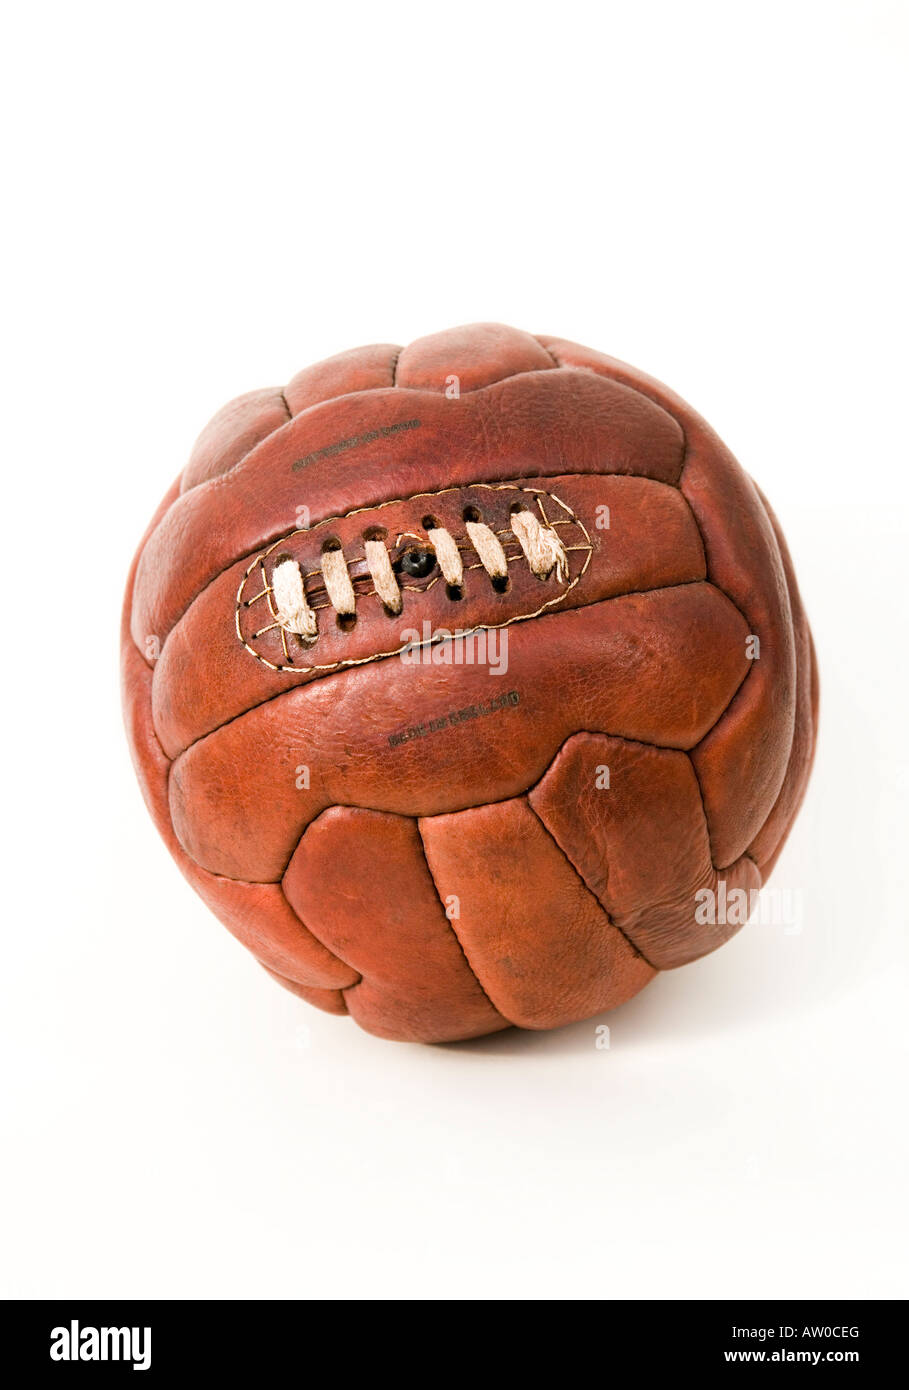 Vintage Leather football against a white background Stock Photo